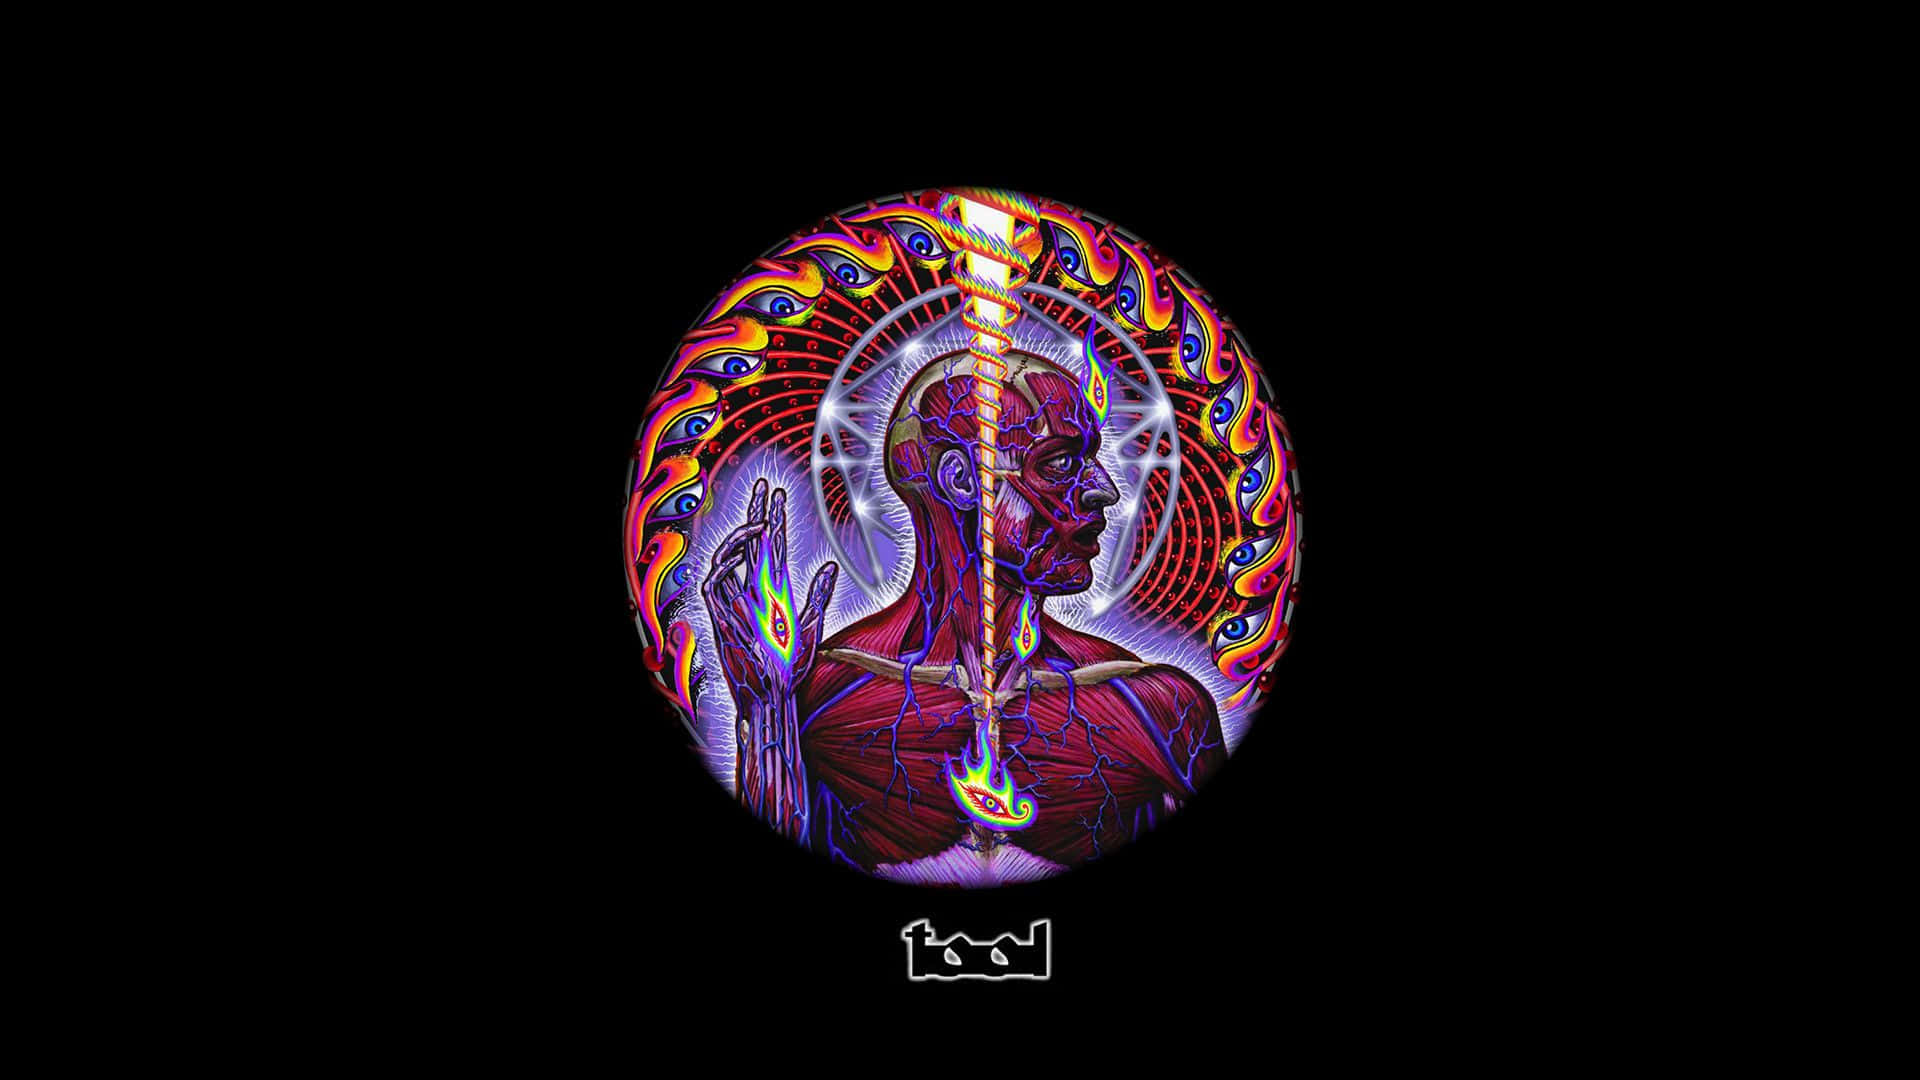 tool band lateralus